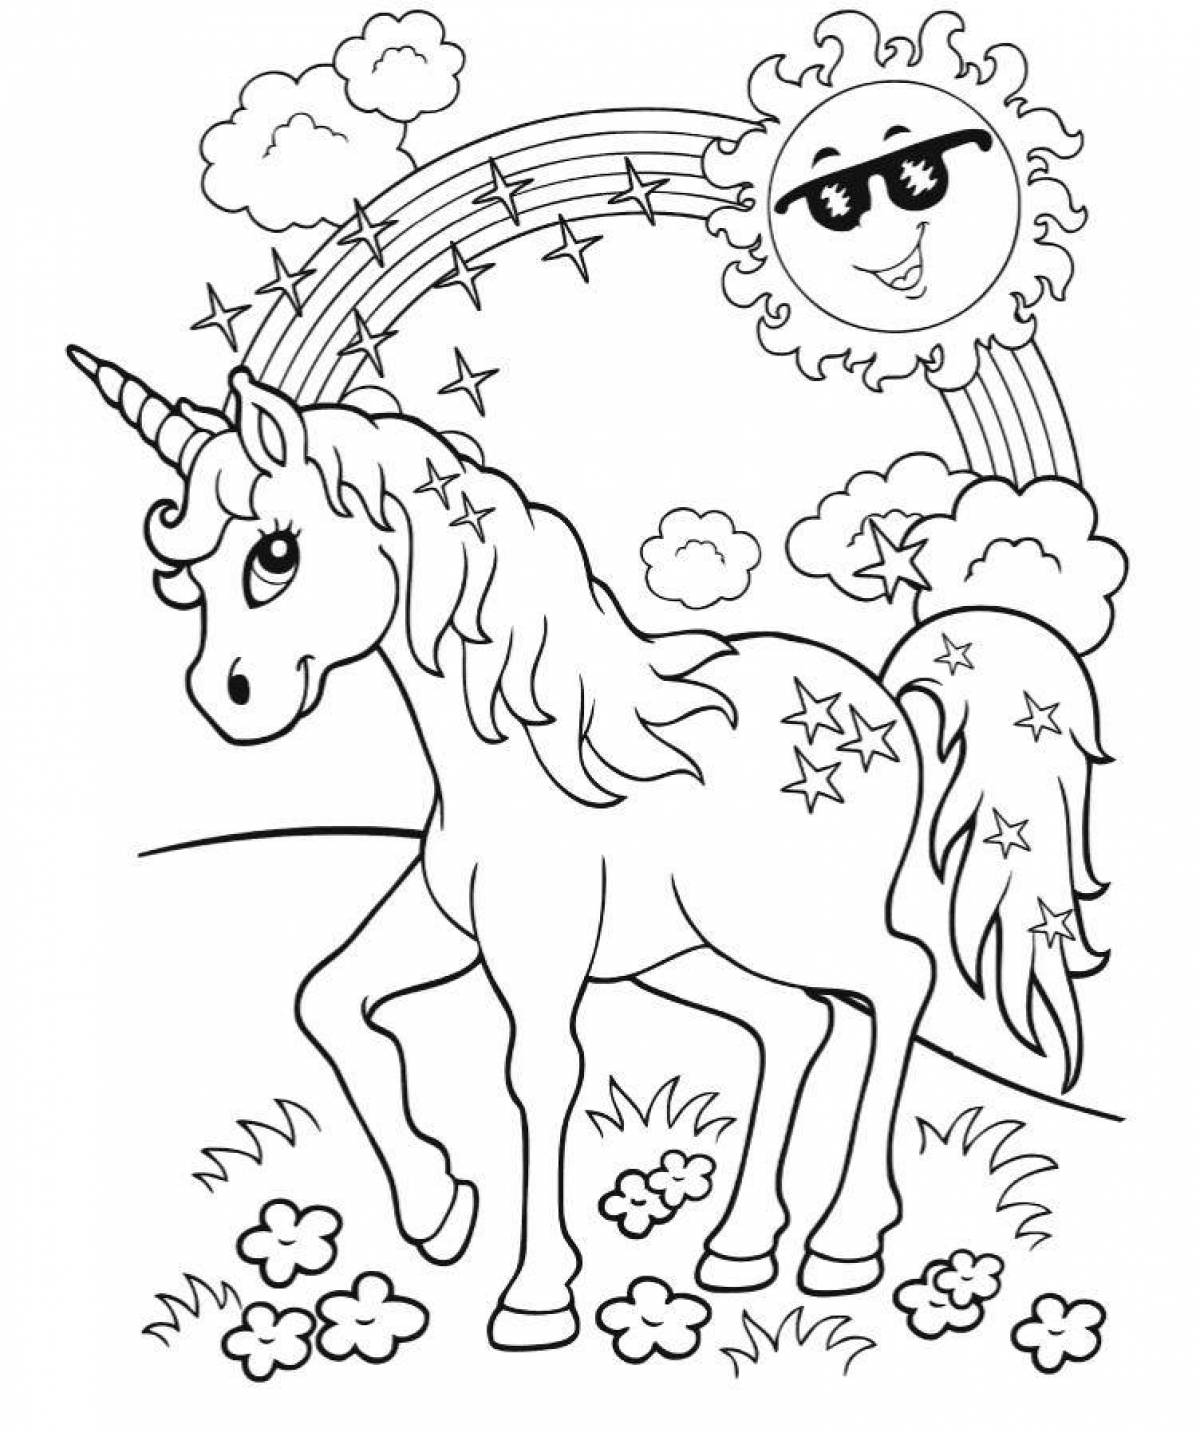 Exotic coloring book for children 5-6 years old unicorns